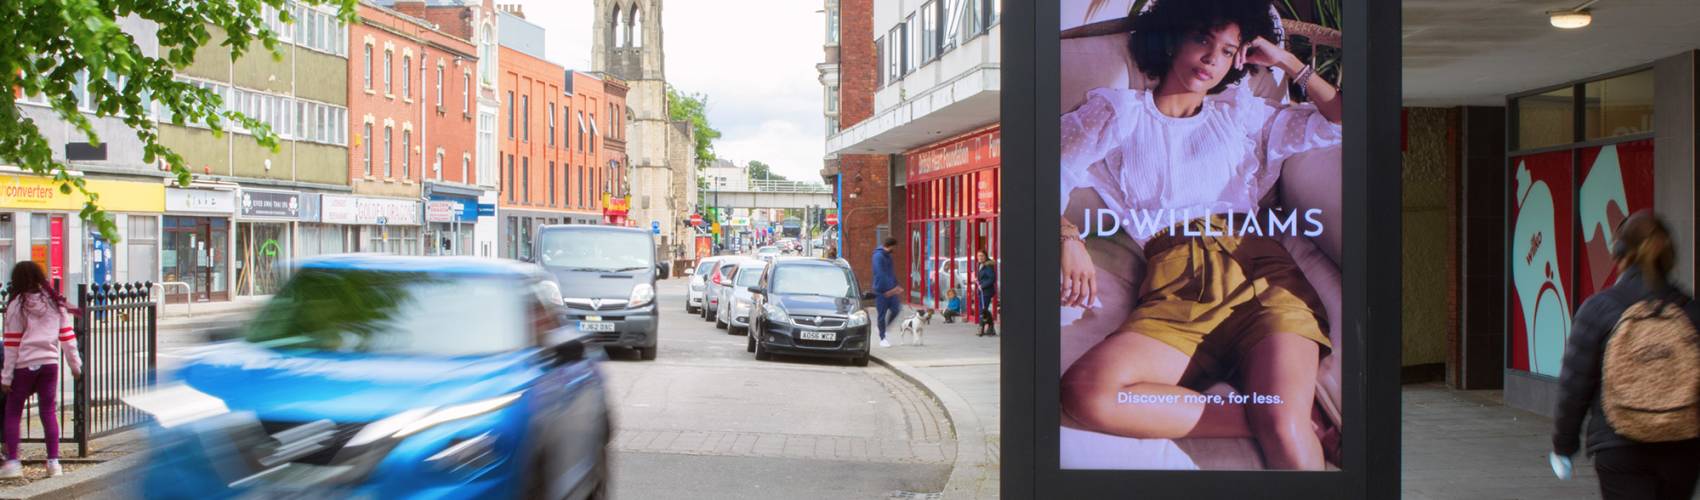 JD Williams ad on high street digital screen with cars driving past